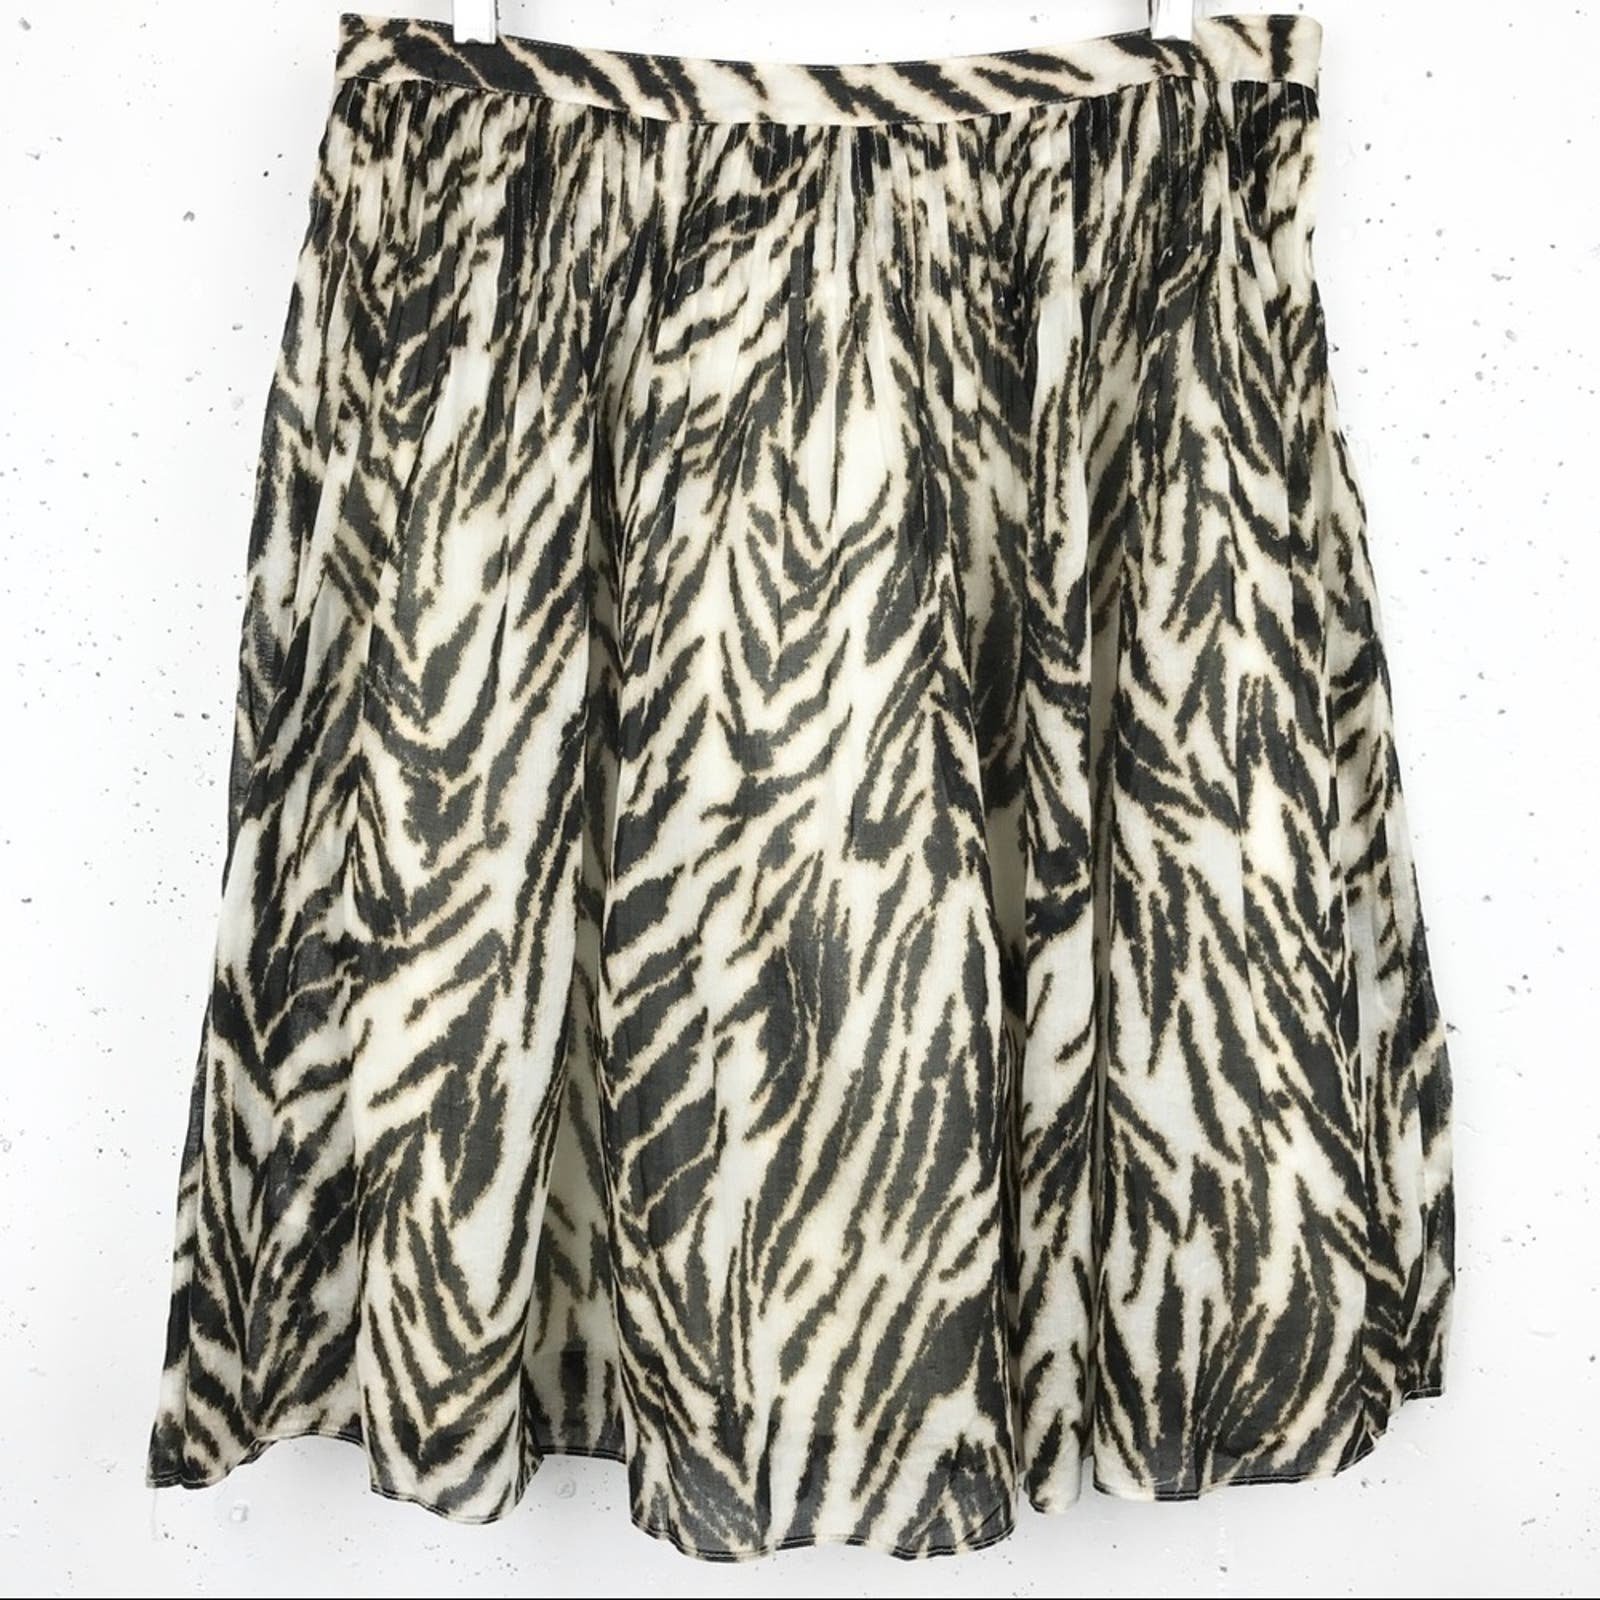 the Lowest price Talbots Tiger Print Cotton Pleated Skirt GhHqCpbPT hot sale